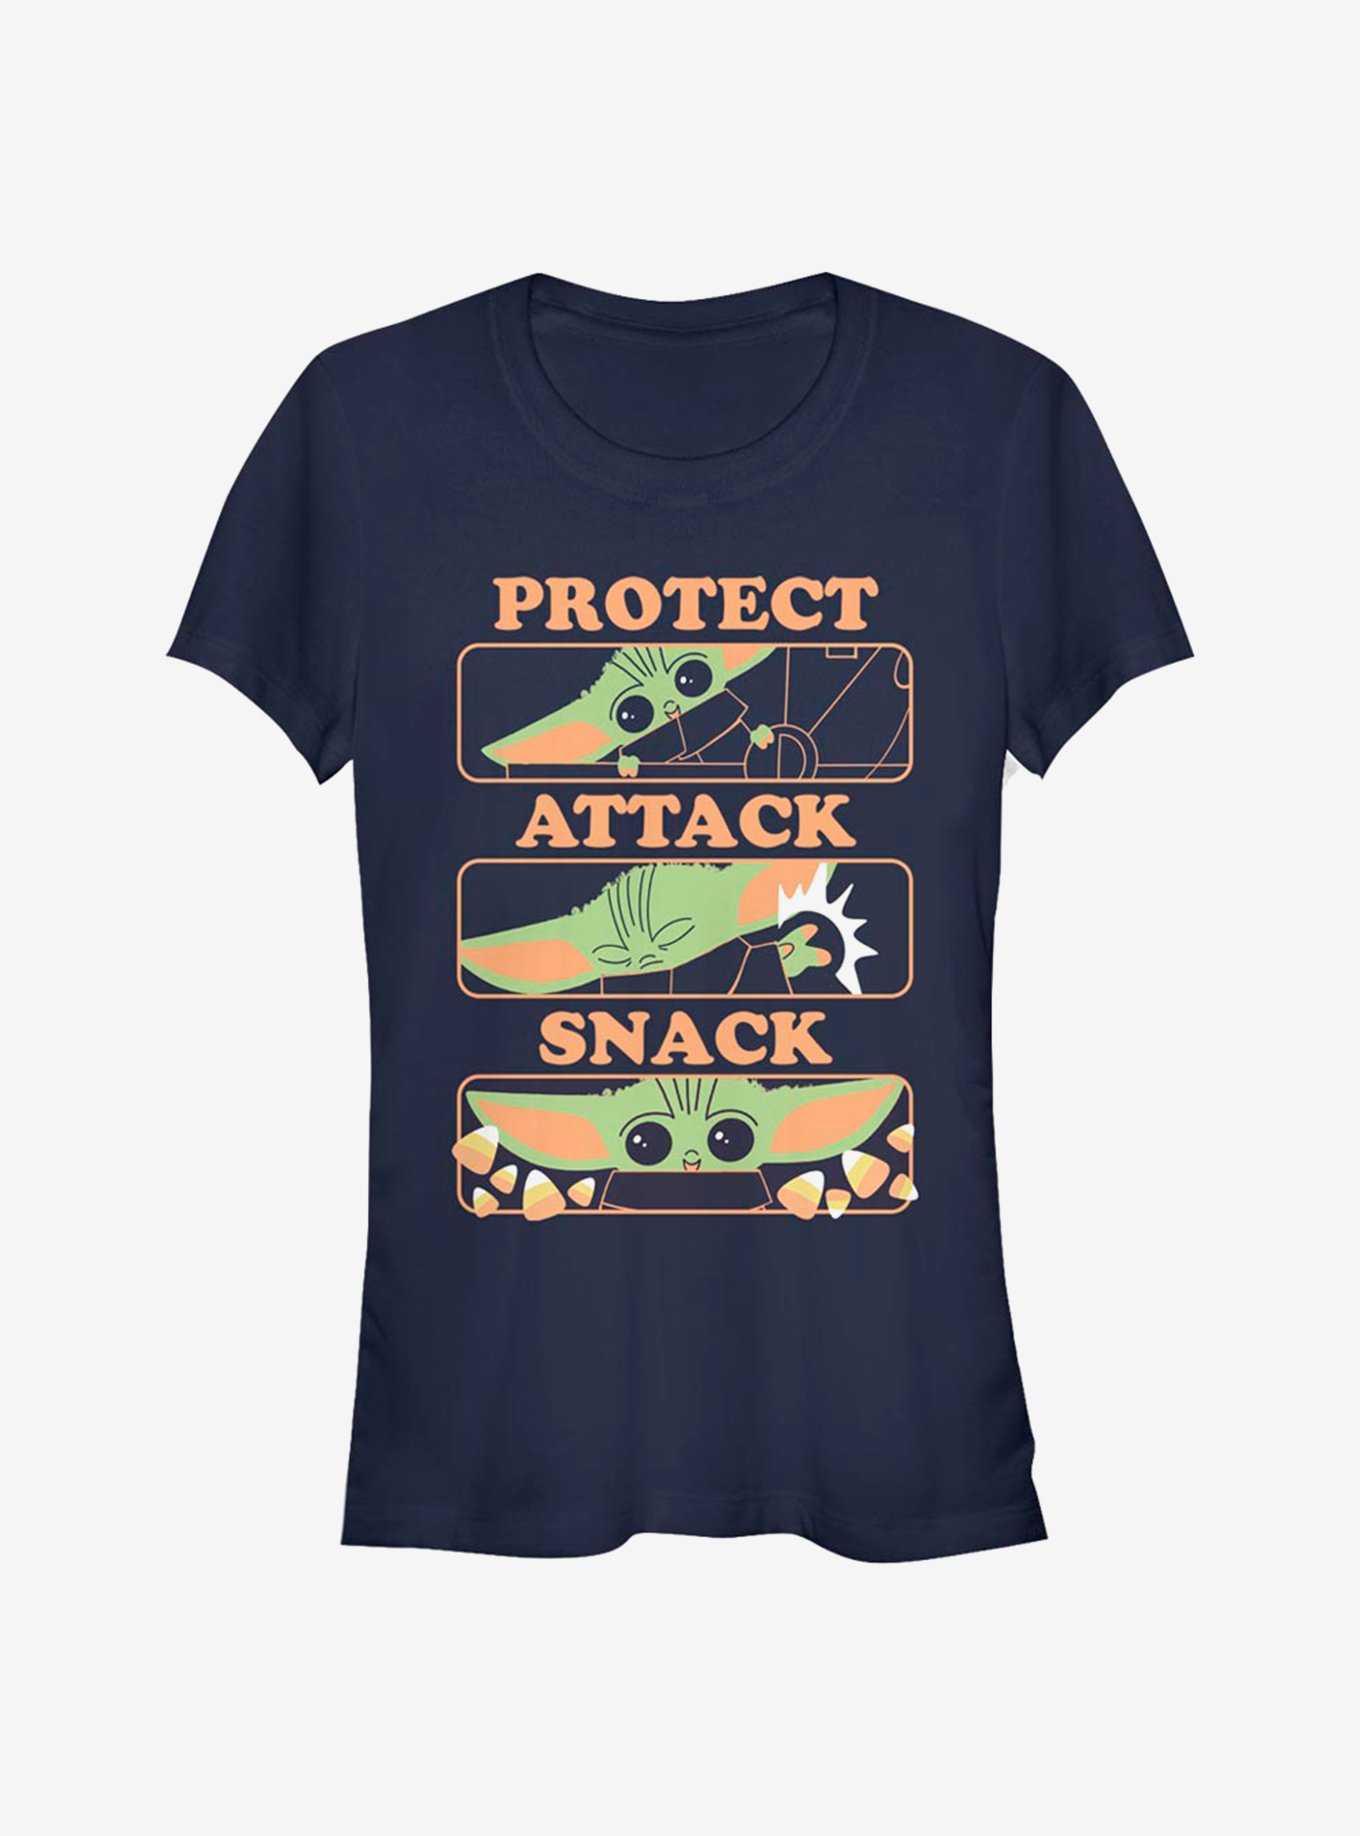 Star Wars The Mandalorian The Child Protect And Snack Girls T-Shirt, , hi-res